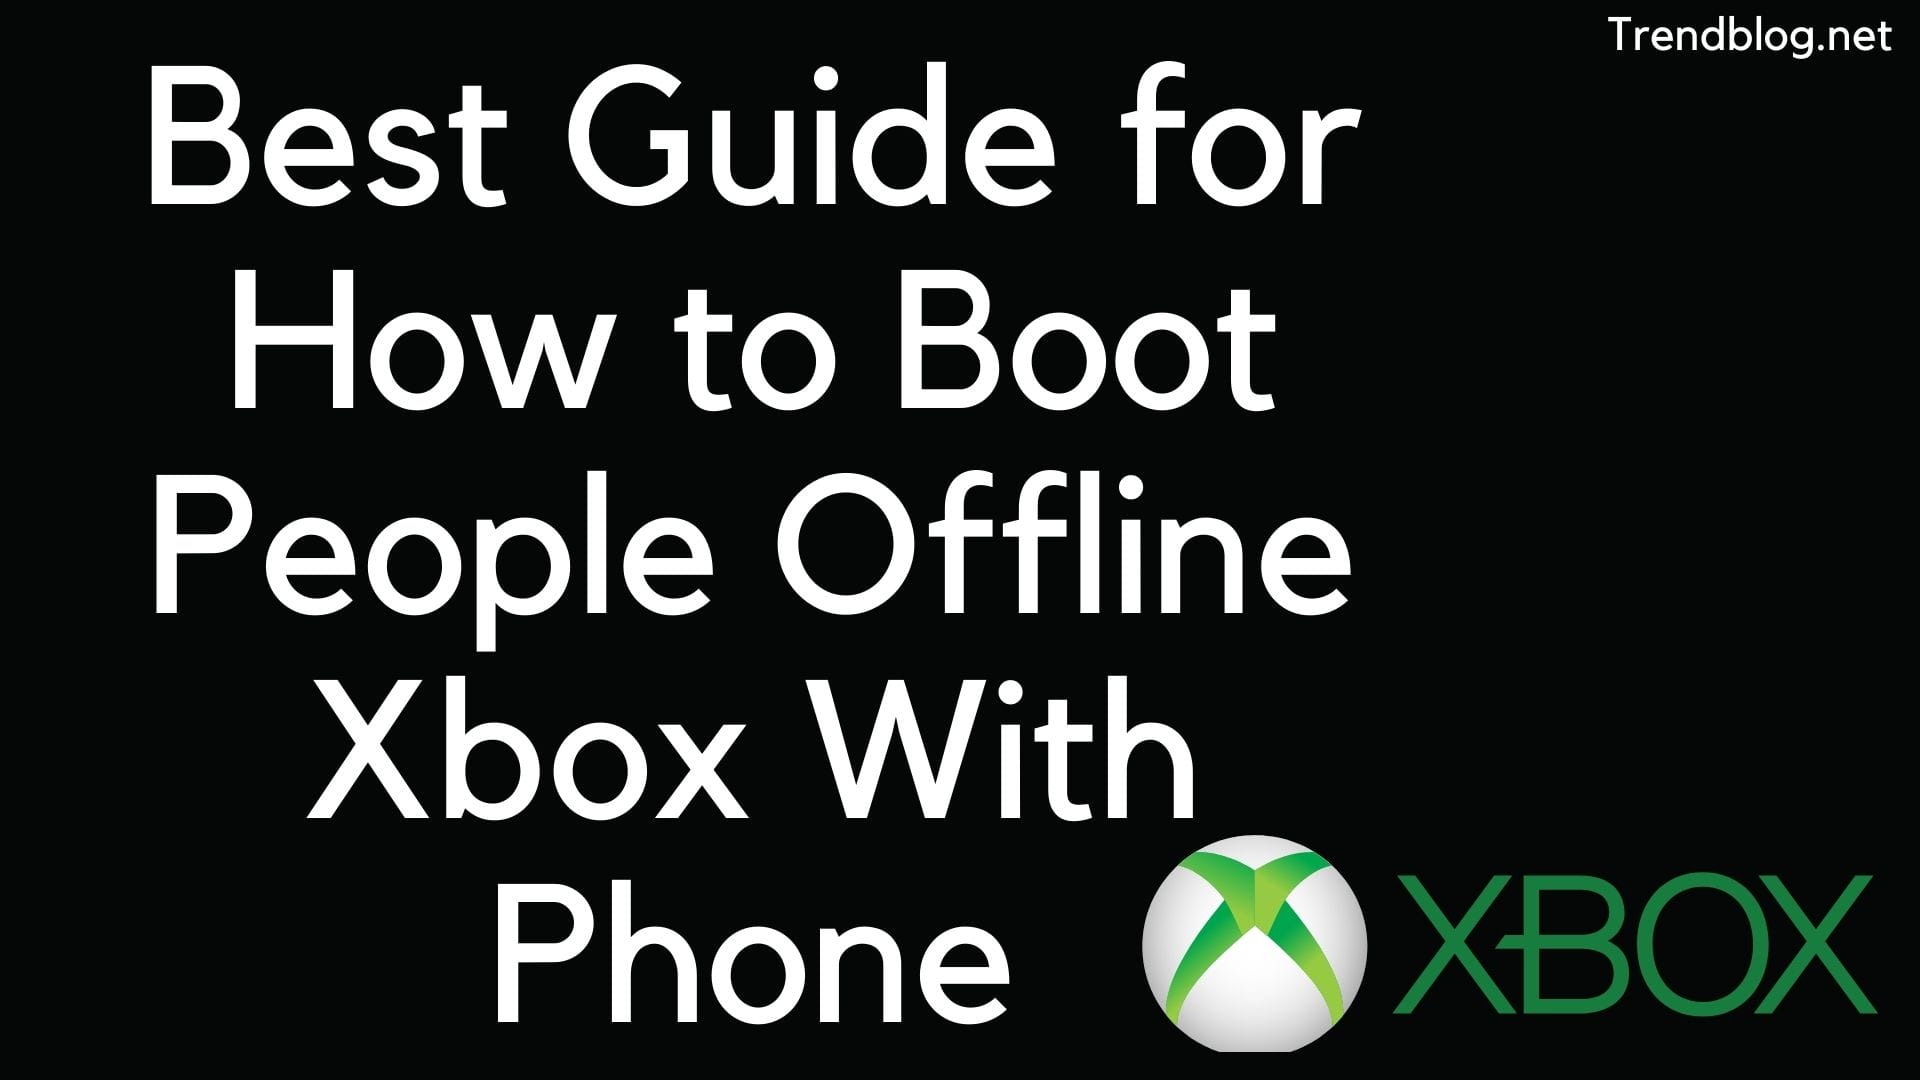  Best Guide for How to Boot People Offline Xbox With Phone